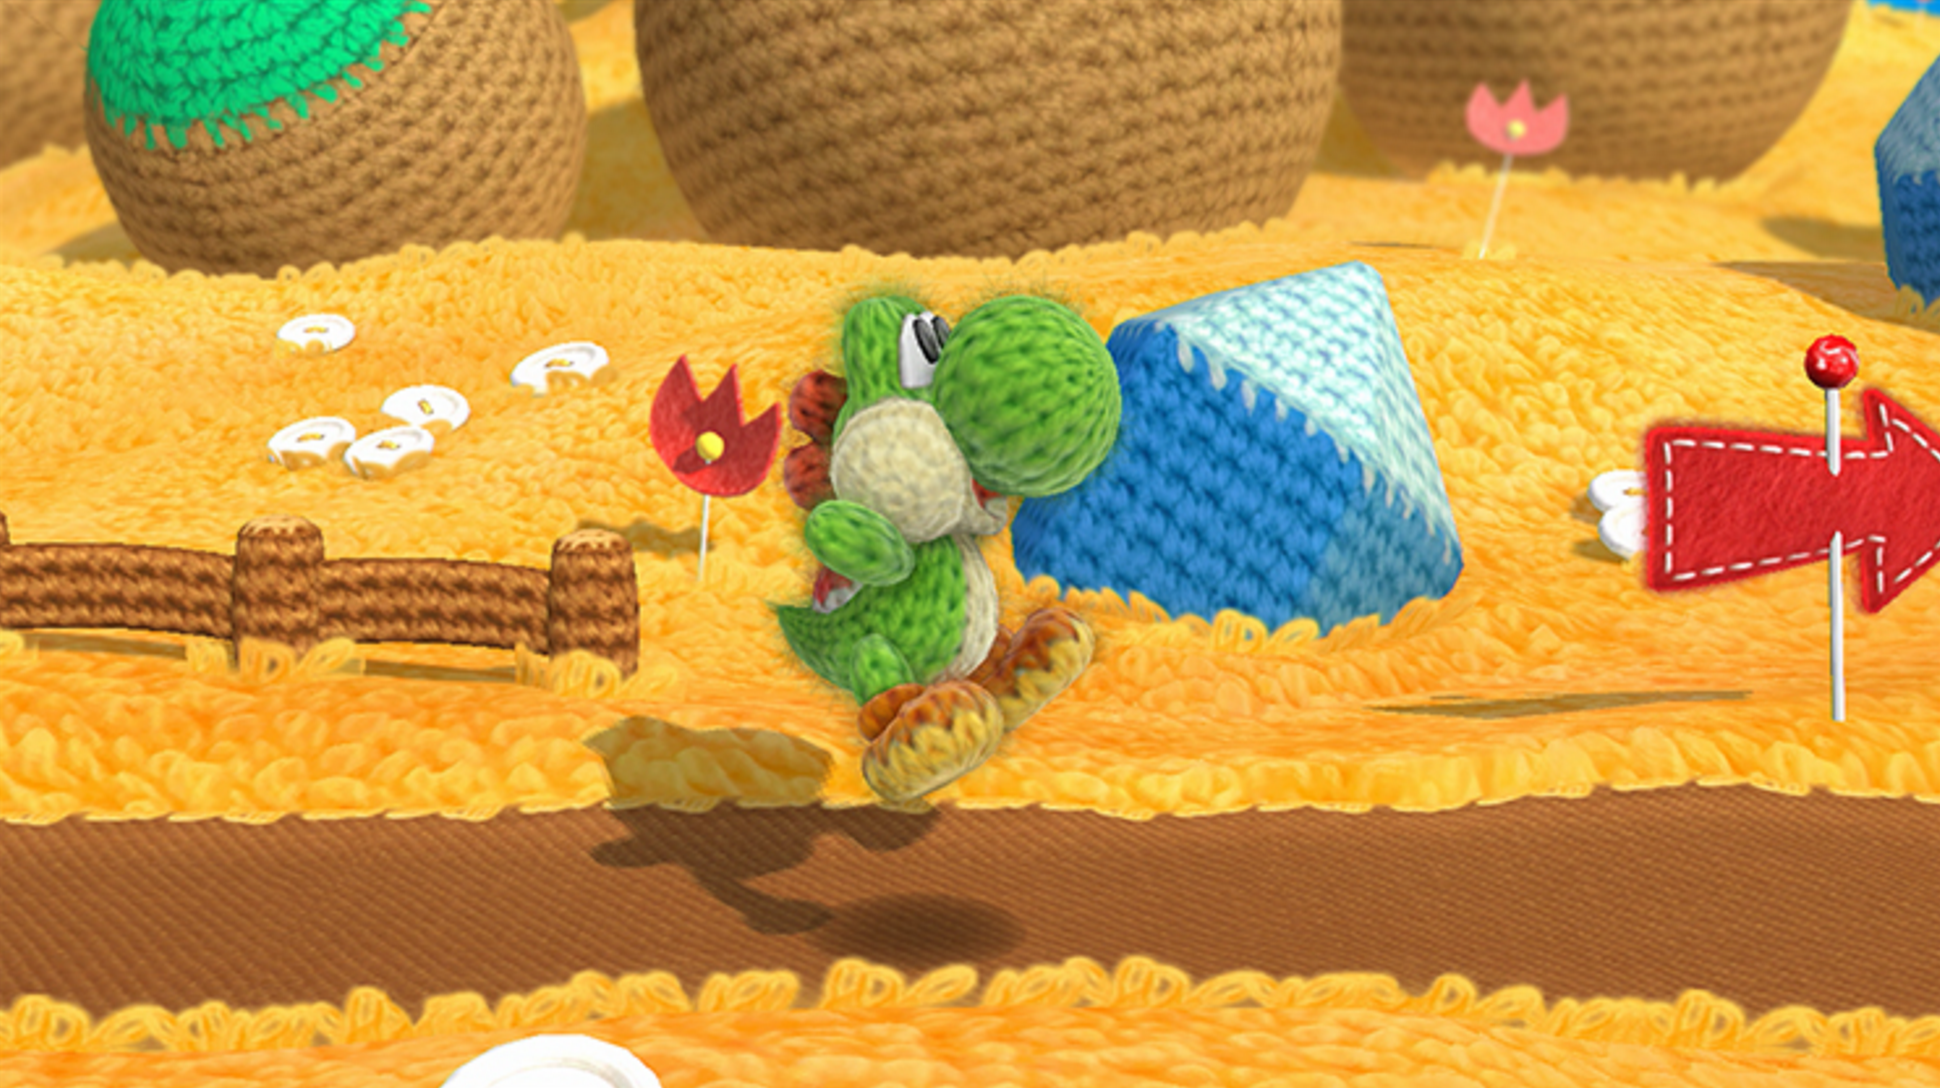 Yoshi's Wooly World saw iconic dinosaurs truly recreated, and this craftsmanship aesthetic began with Super Mario World 2.